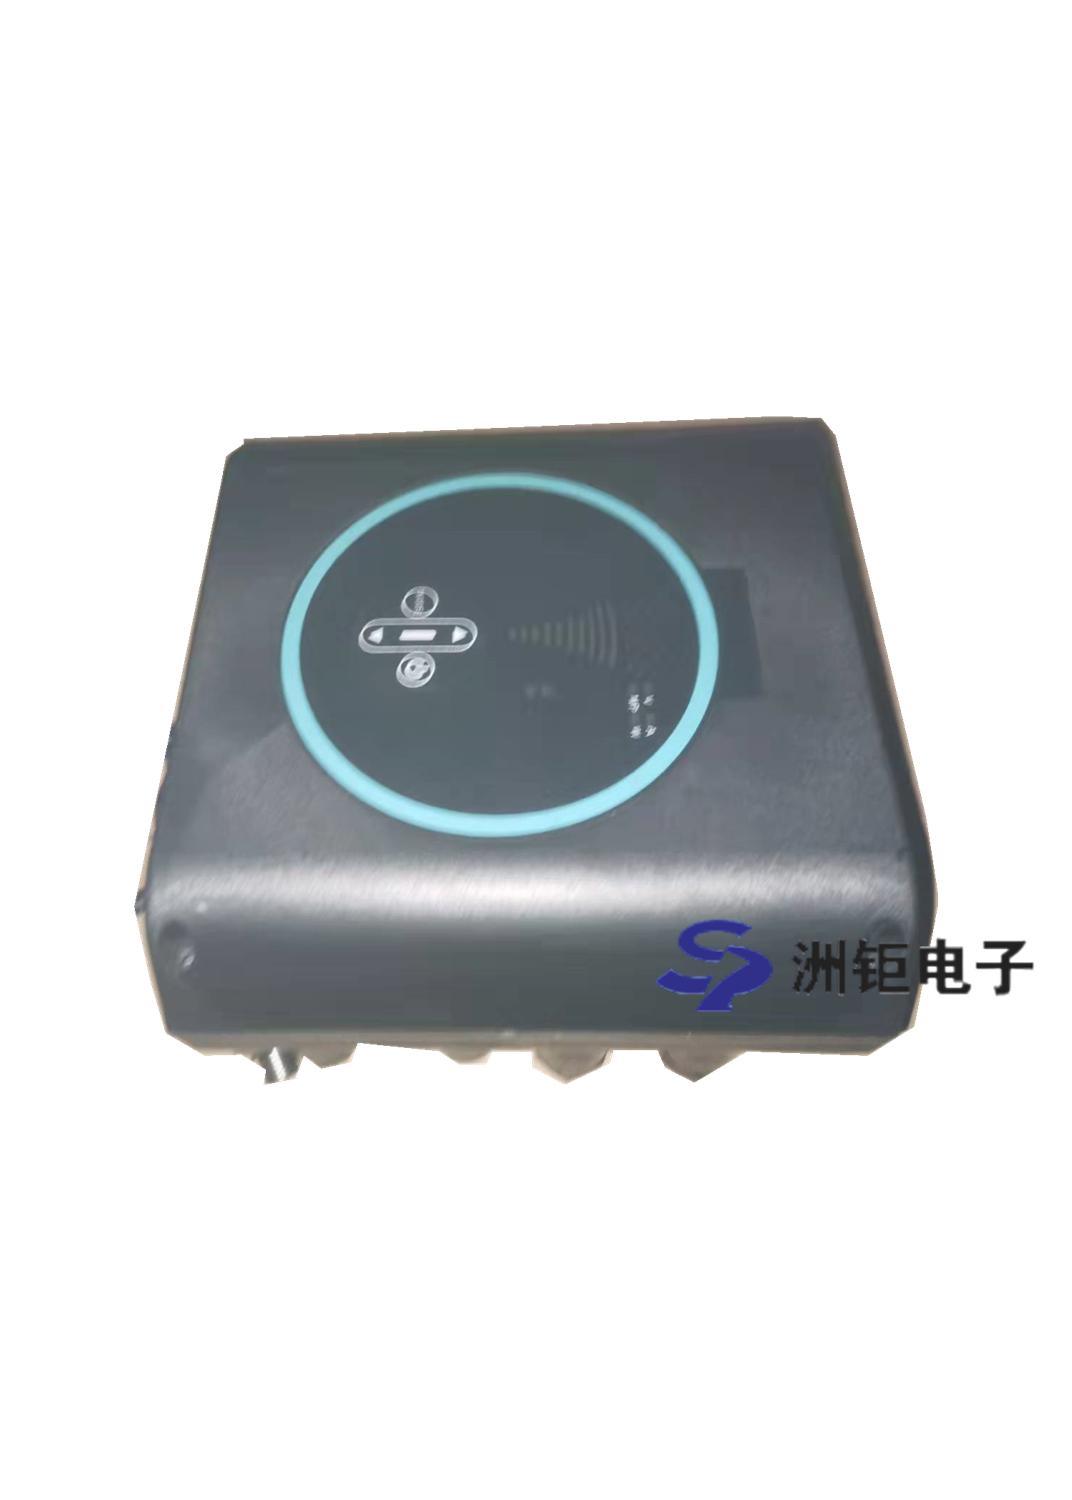 Ec220V Water Pump Driver Controller-Industrial Water Pump Driver by Sp Made in China